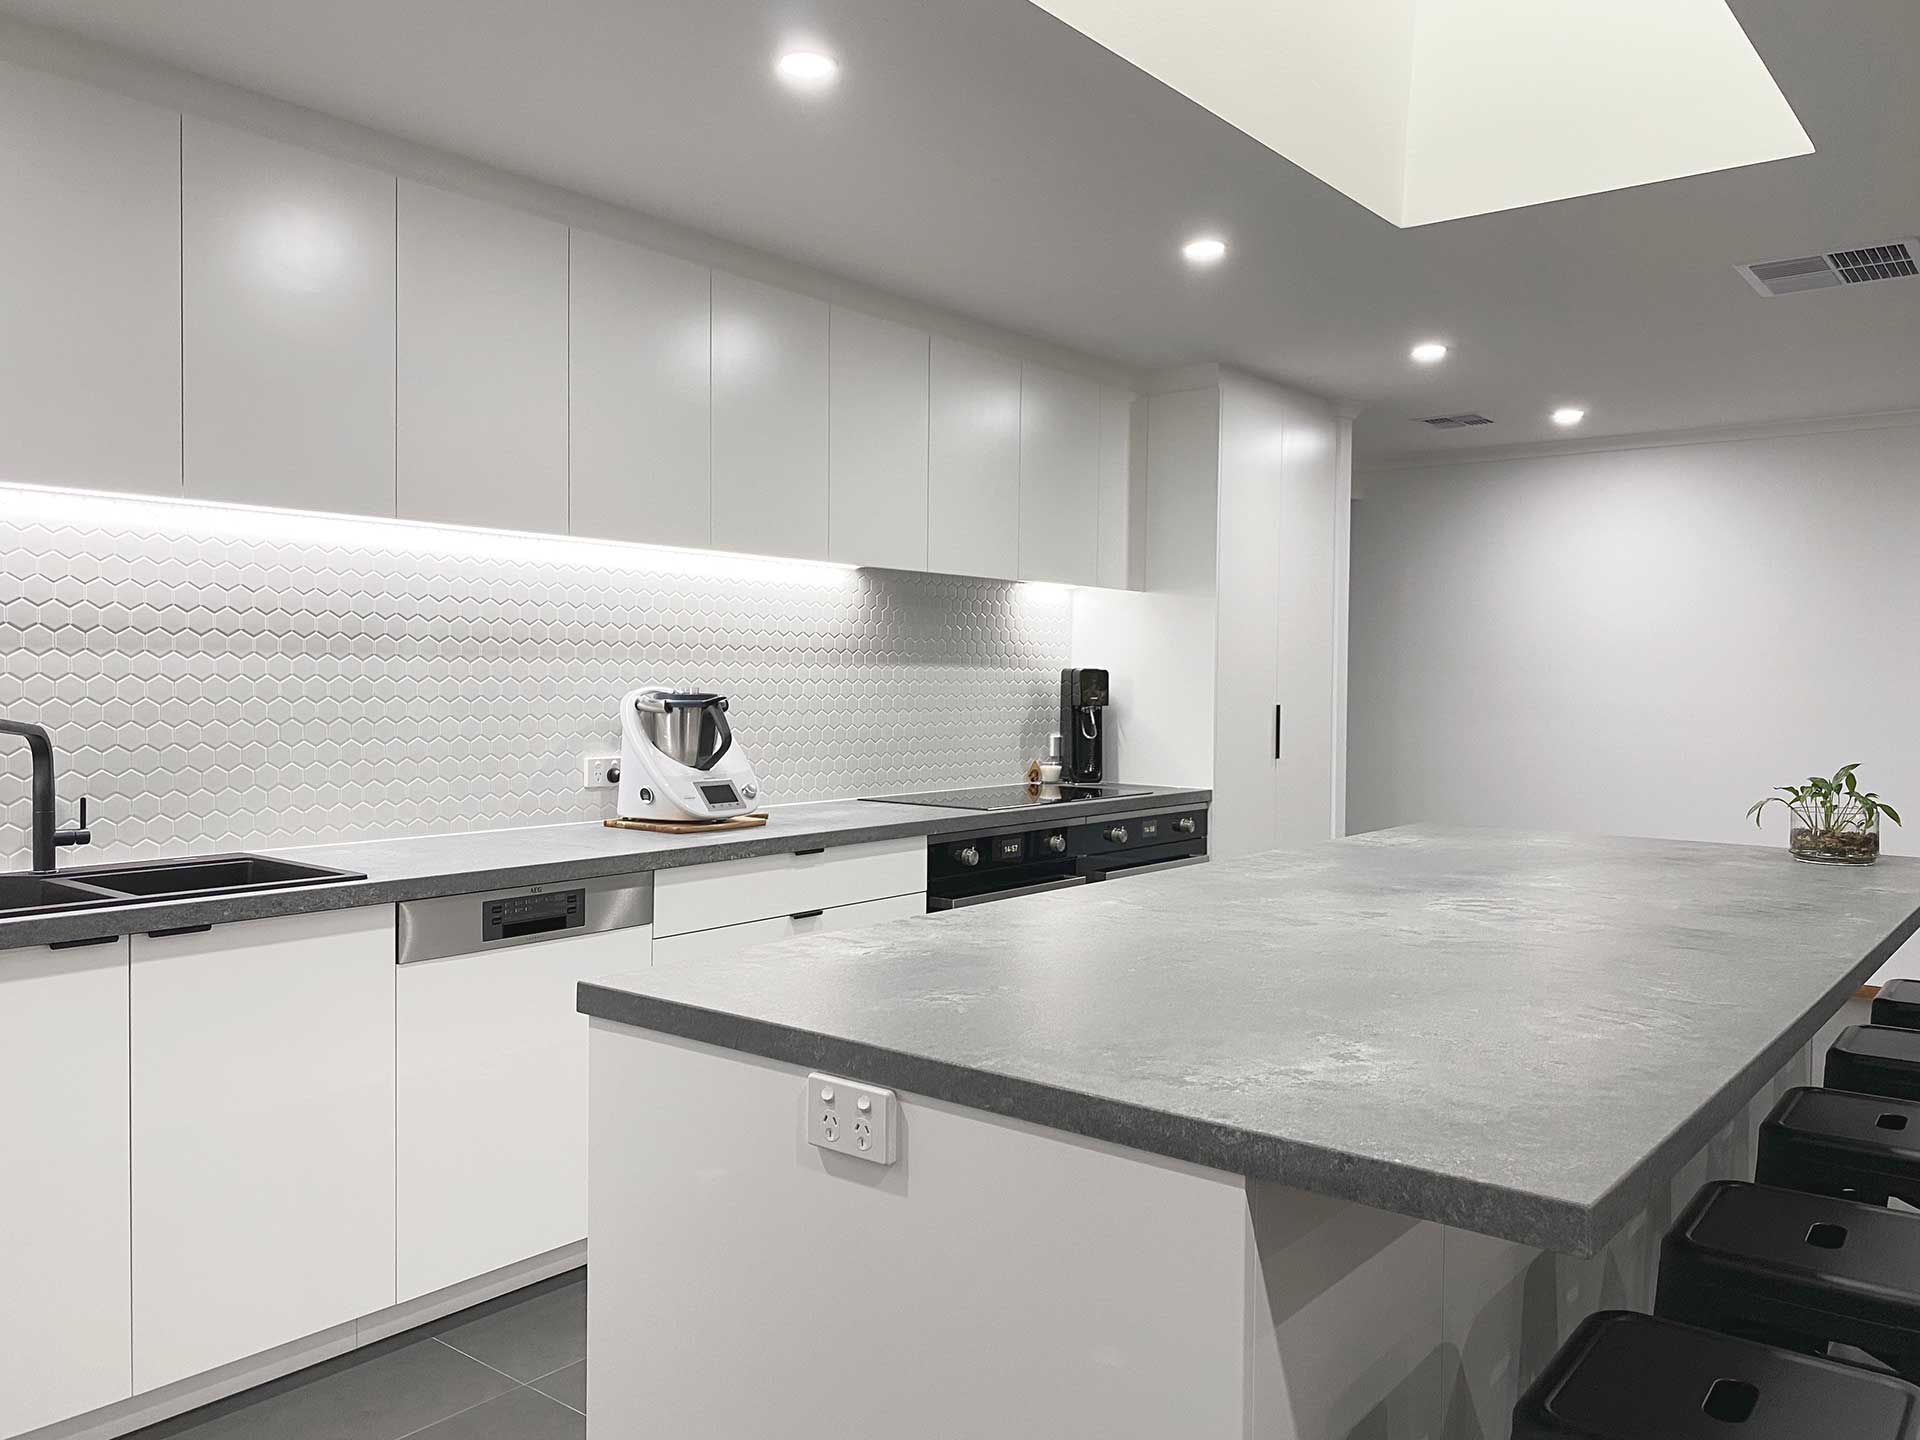 Kitchen Renovation Services And Design In Oakleigh